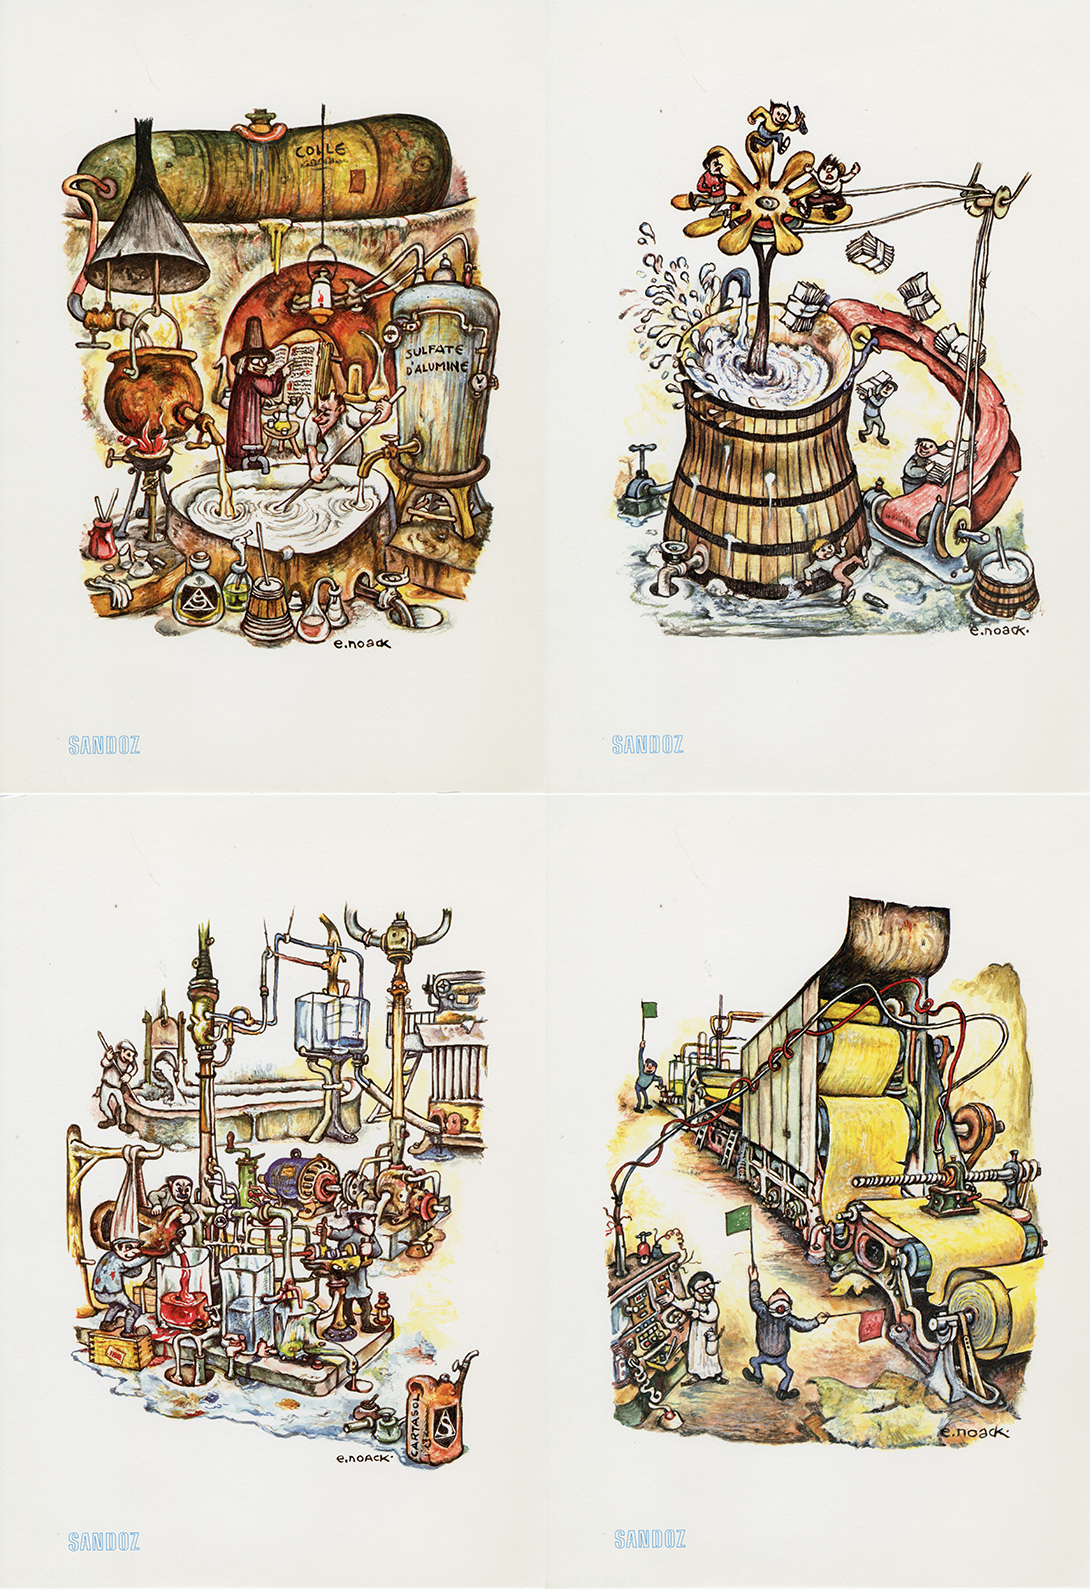 Four prints by Eugène Noack in a two by two grid featuring muted tones and fantastical machinery